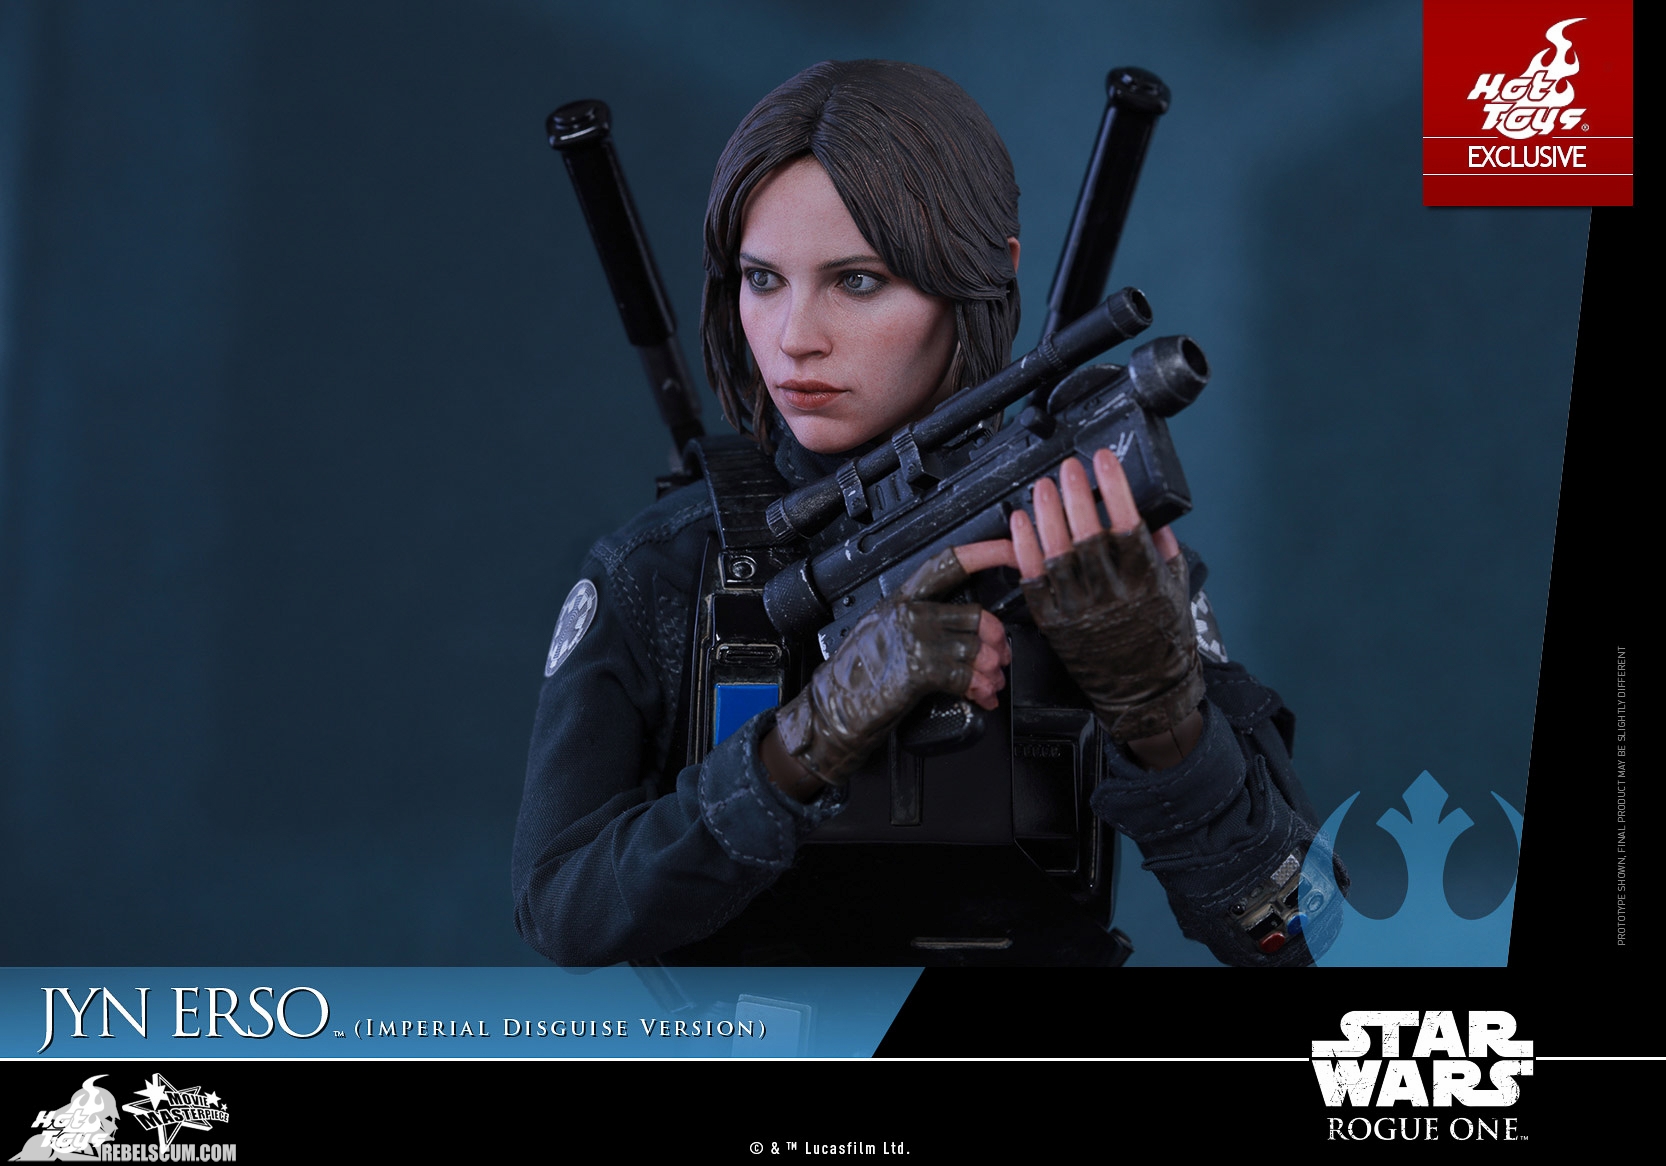 Hot-Toys-MMS419-Rogue-One-Jyn-Erso-Imperial-Disguise-014.jpg